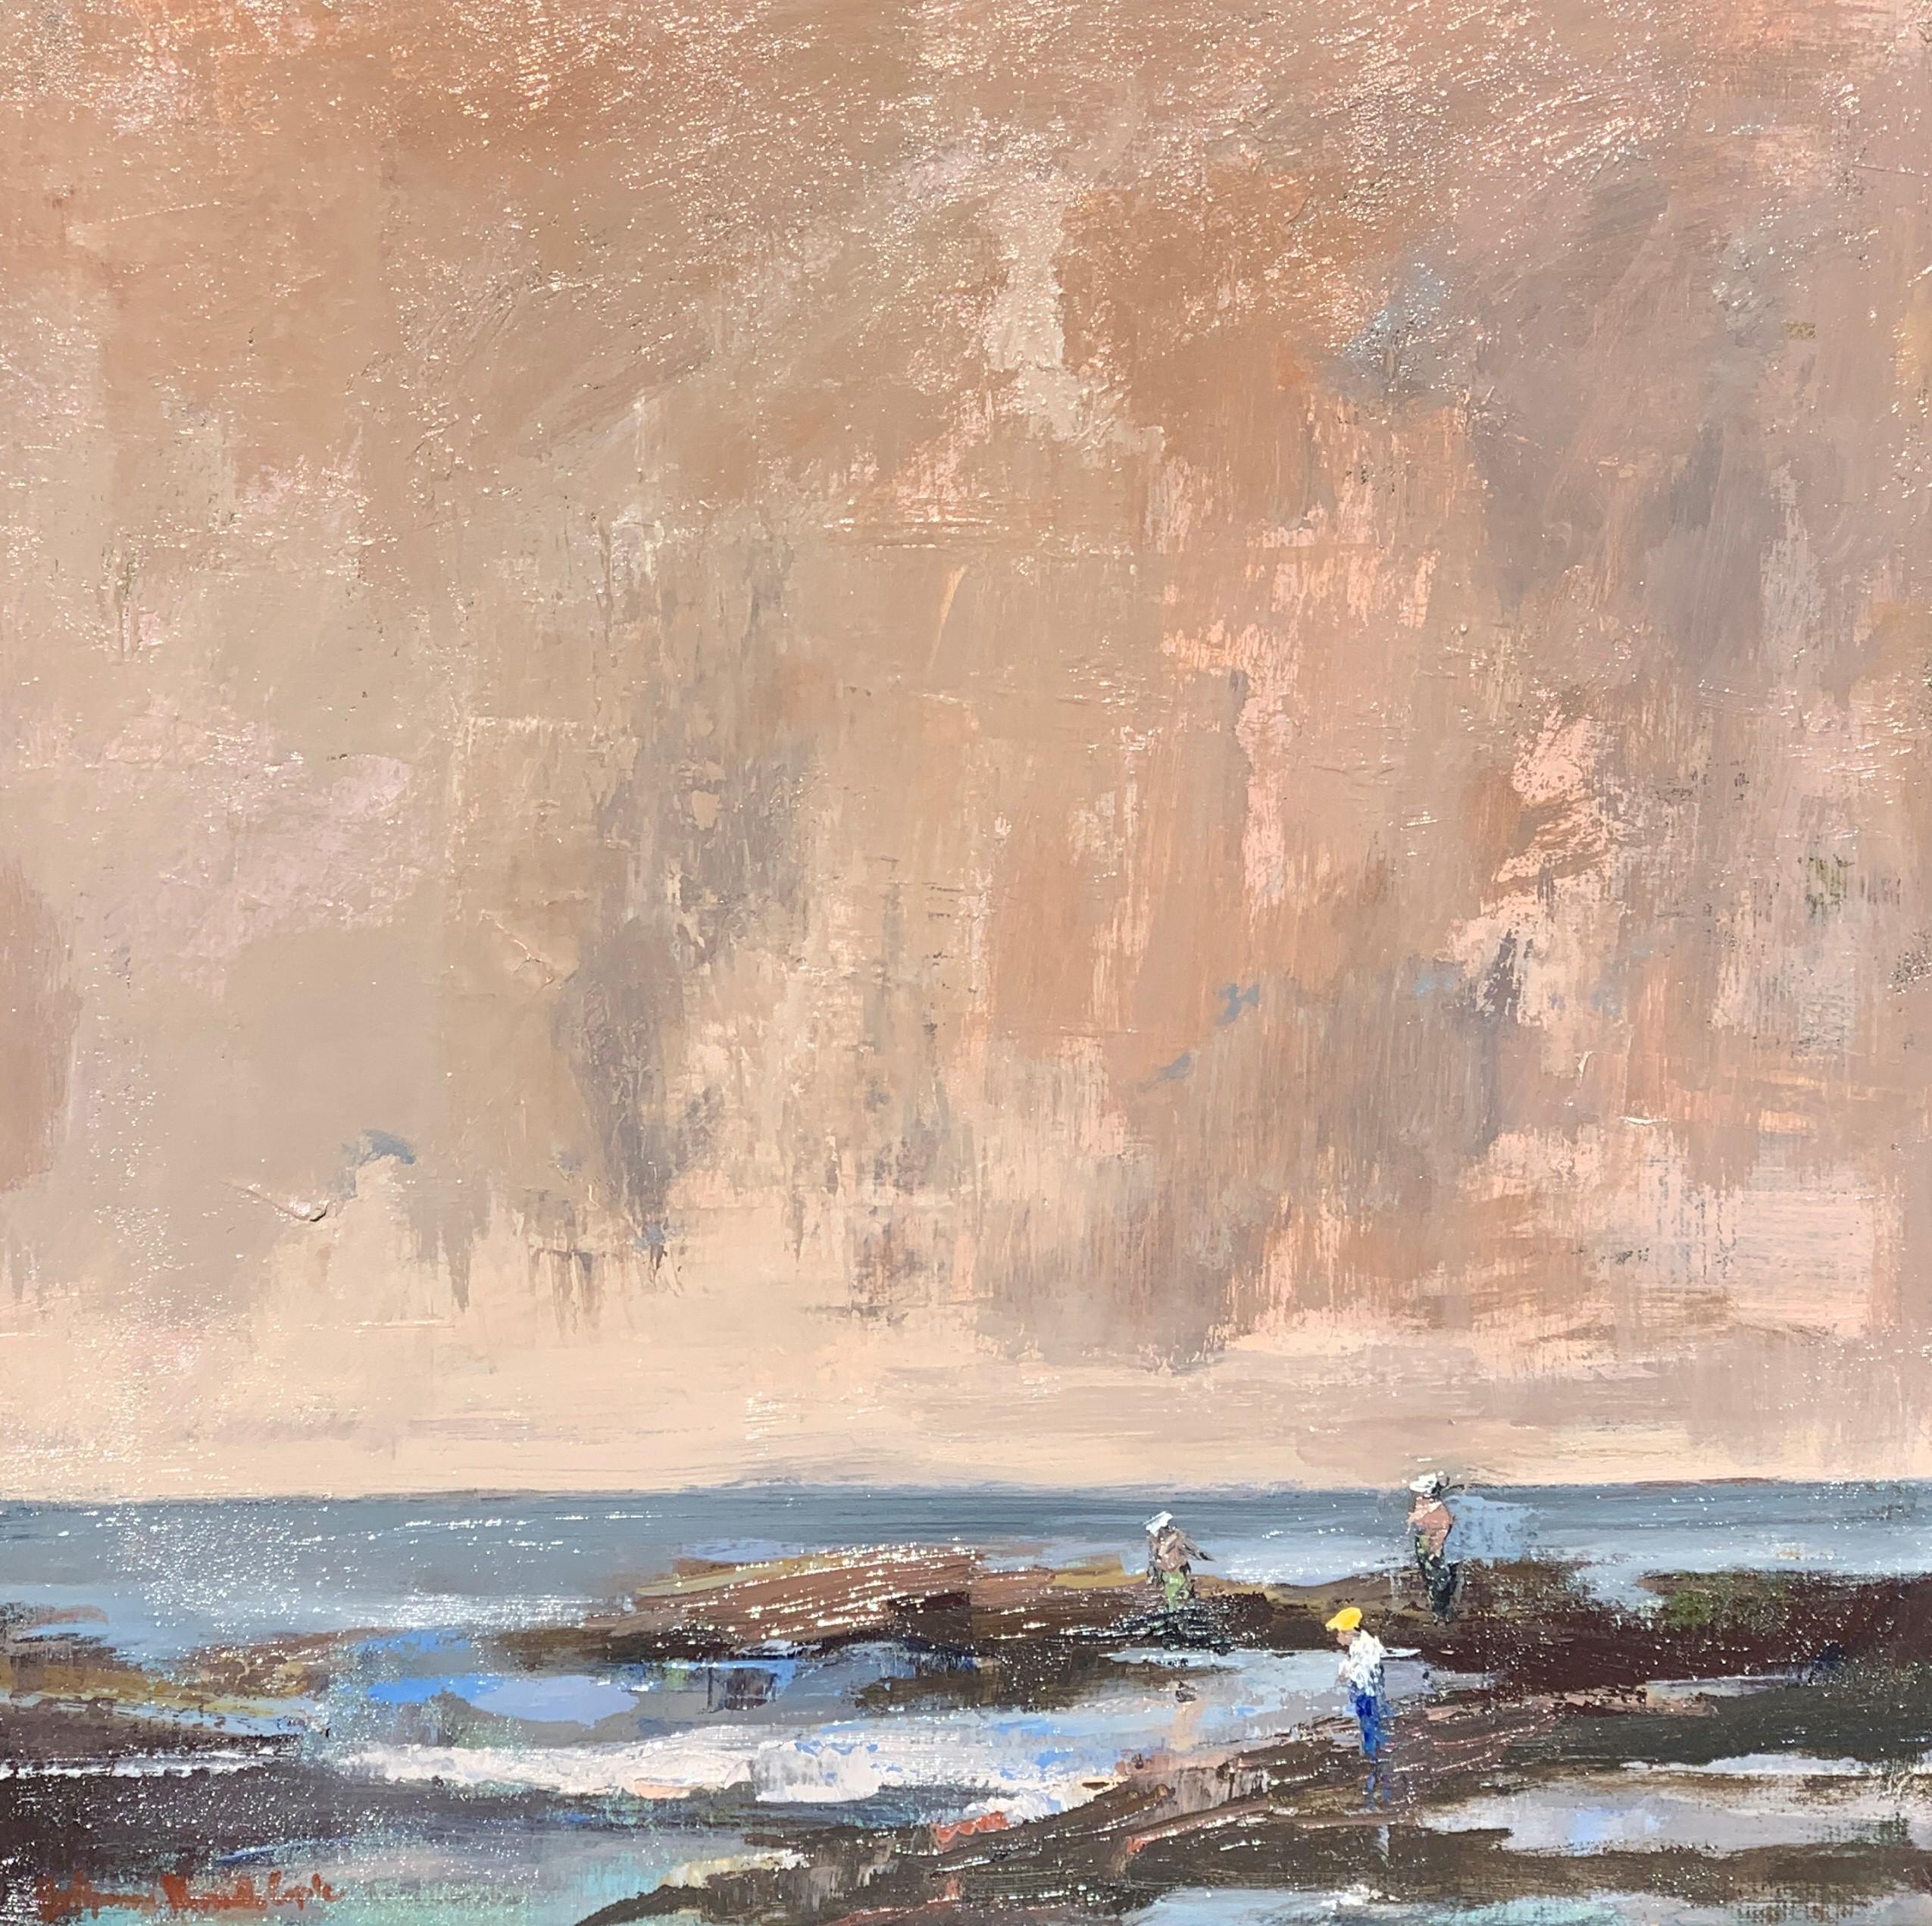 Bethanne Kinsella Cople Landscape Painting - Trampling the Pinky Skies All Day by Bethanne Cople, Plein Air Beach Painting